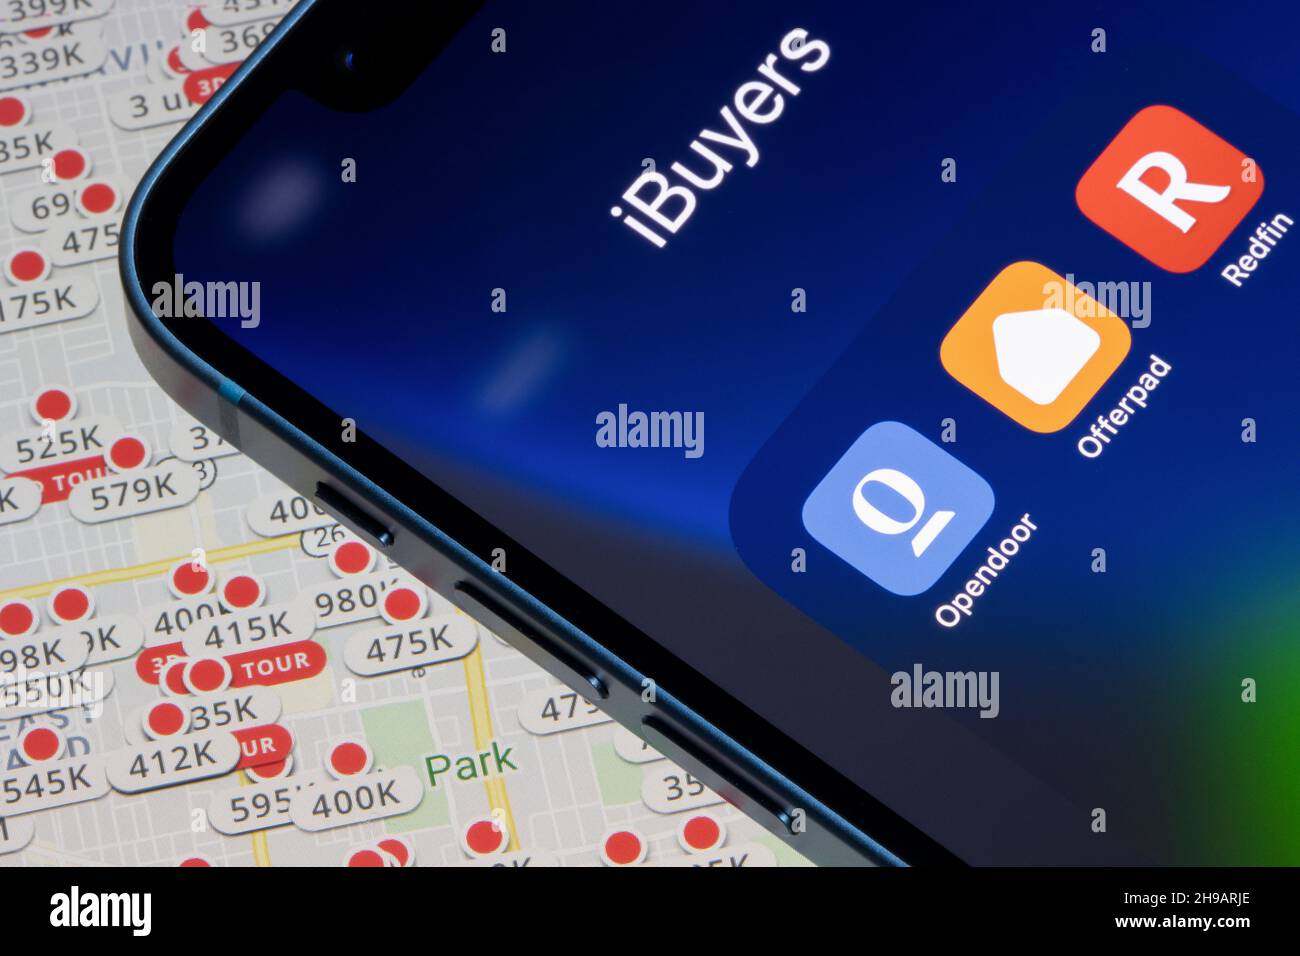 Real estate iBuyers' apps - Opendoor, Offerpad, and Redfin are seen on an iPhone over the Zillow website's listed properties map in Portland, Oregon. Stock Photo